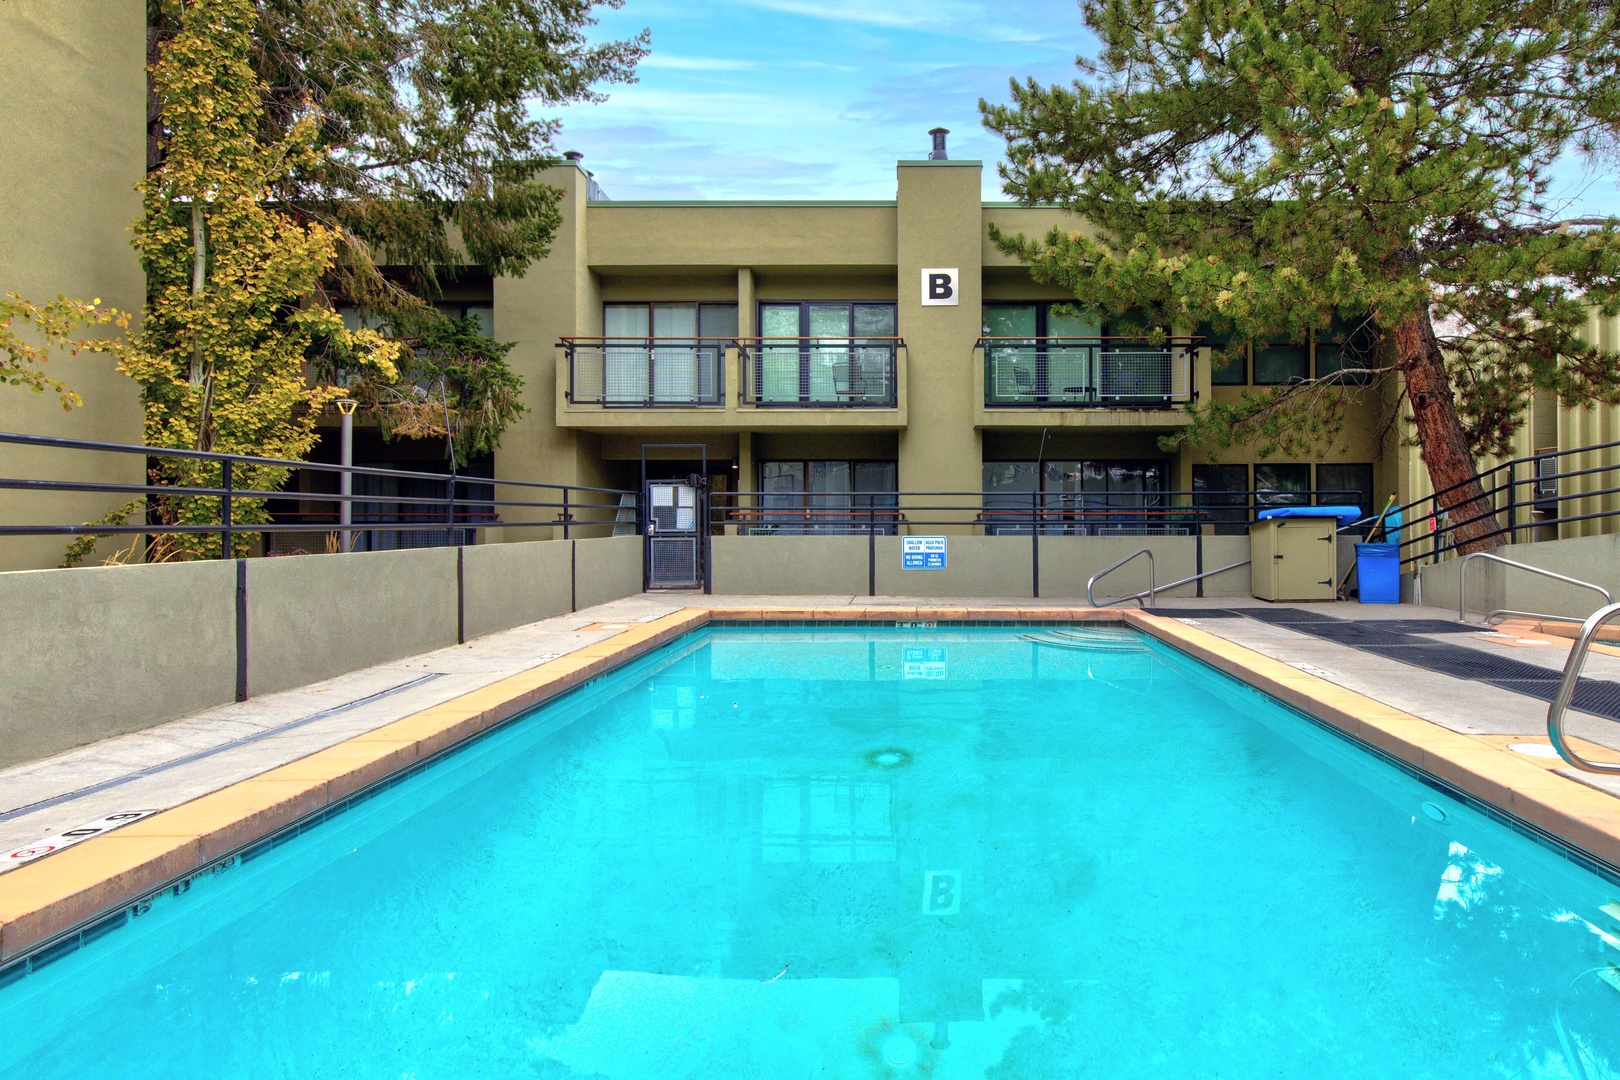 Edelweiss Haus A102 by Moose Management: The pool is open all year.